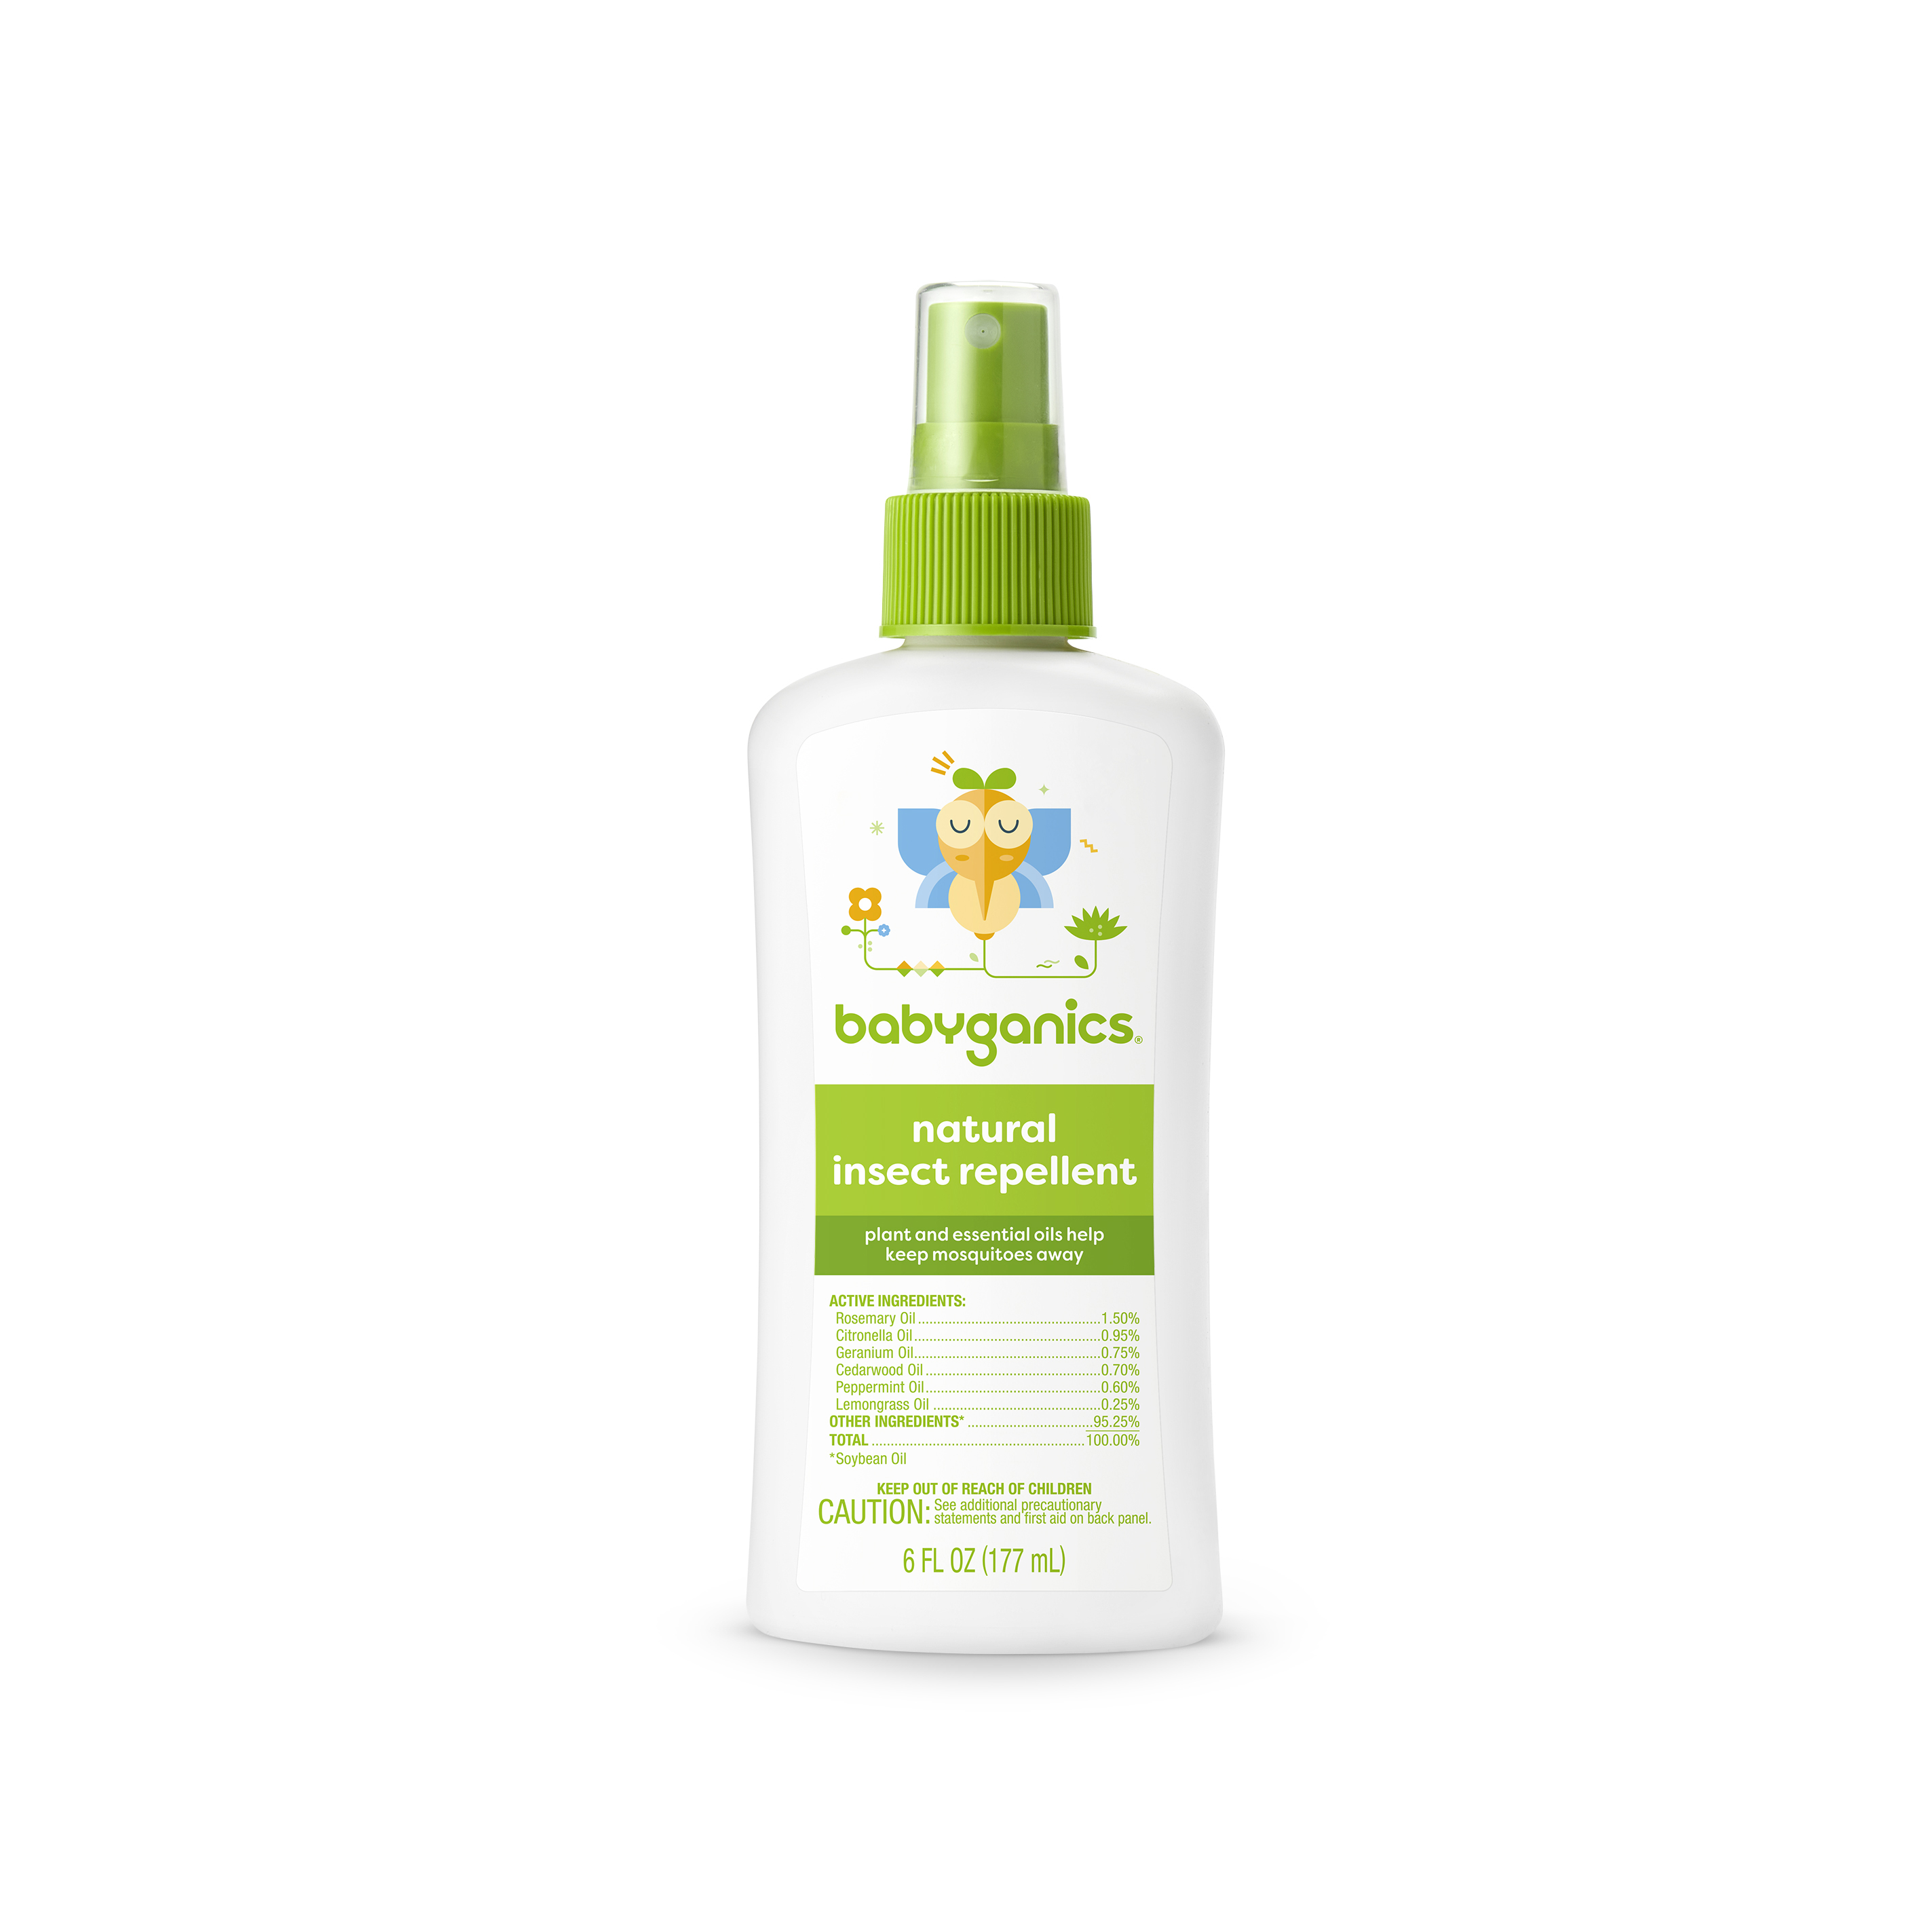  OFF! Kids Insect Repellent Spray, 100% Plant Based Oils, Safe  for Use On Babies, Toddlers and Kids, 4 oz : Health & Household